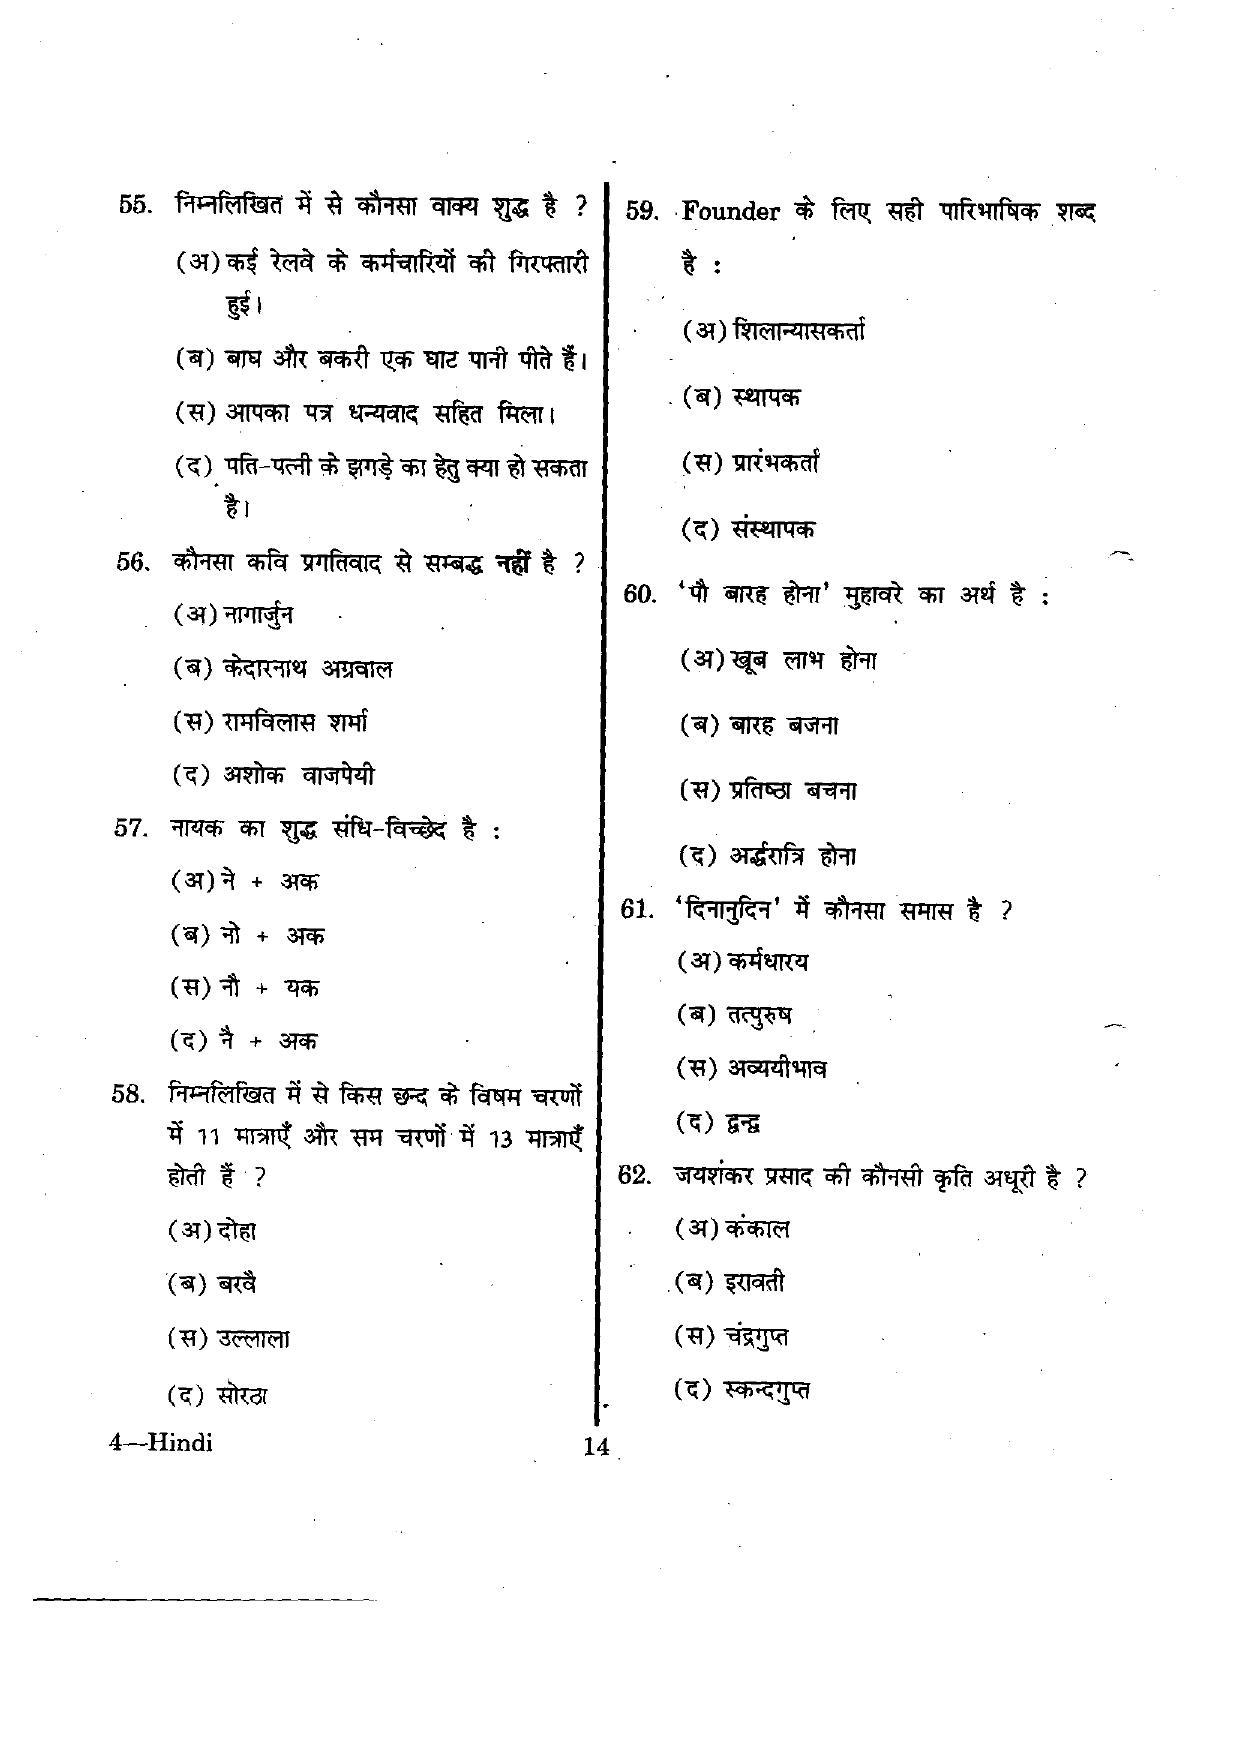 URATPG Hindi 2012 Question Paper - Page 14